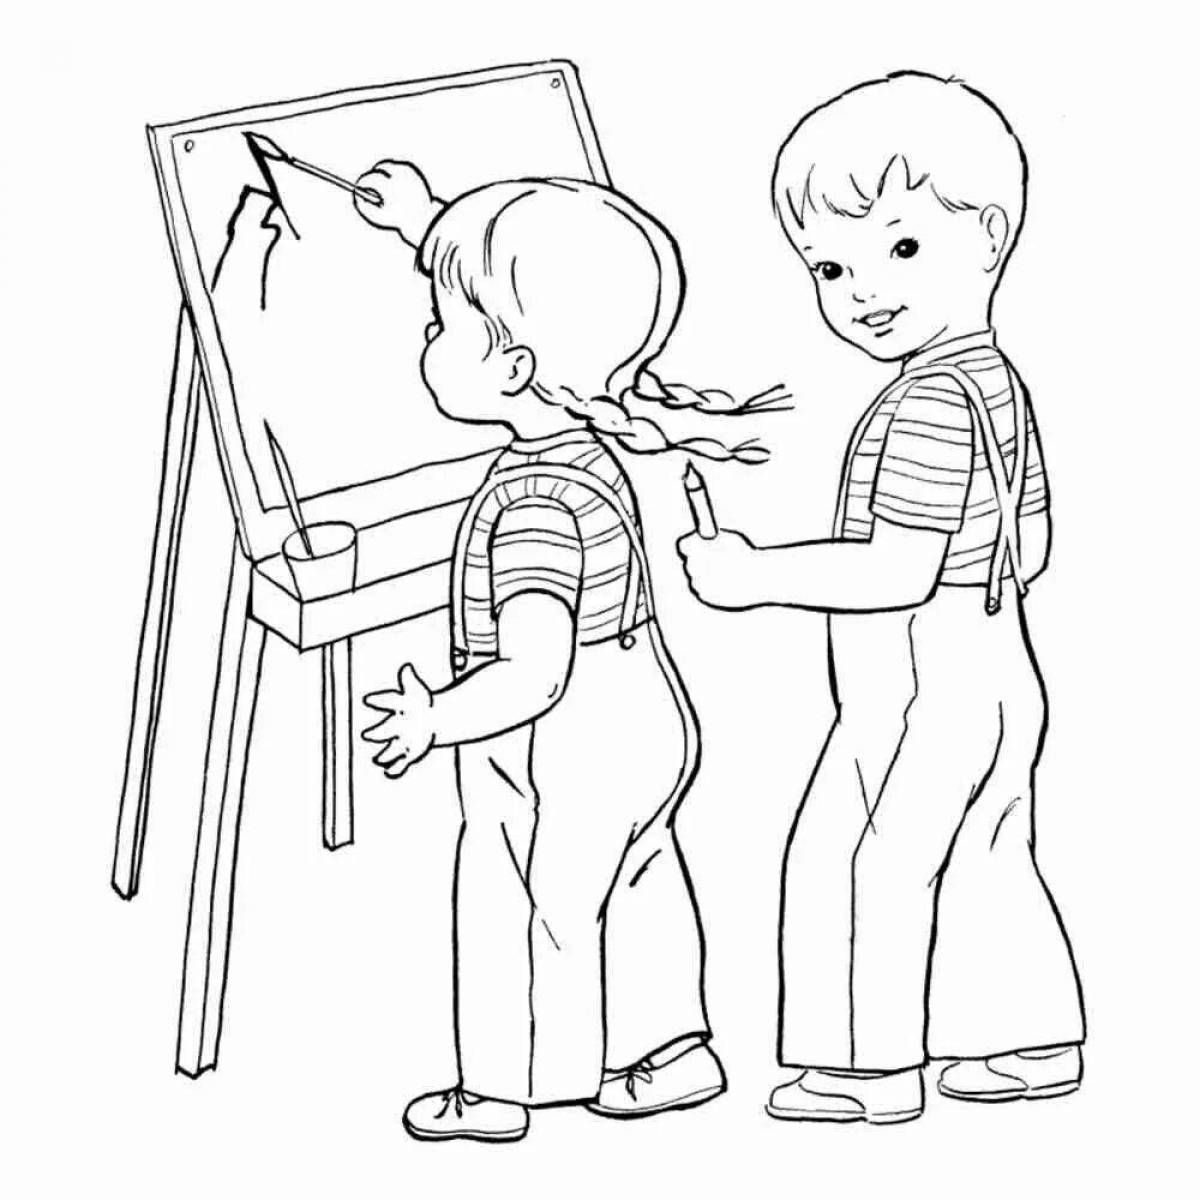 How to draw a person #11